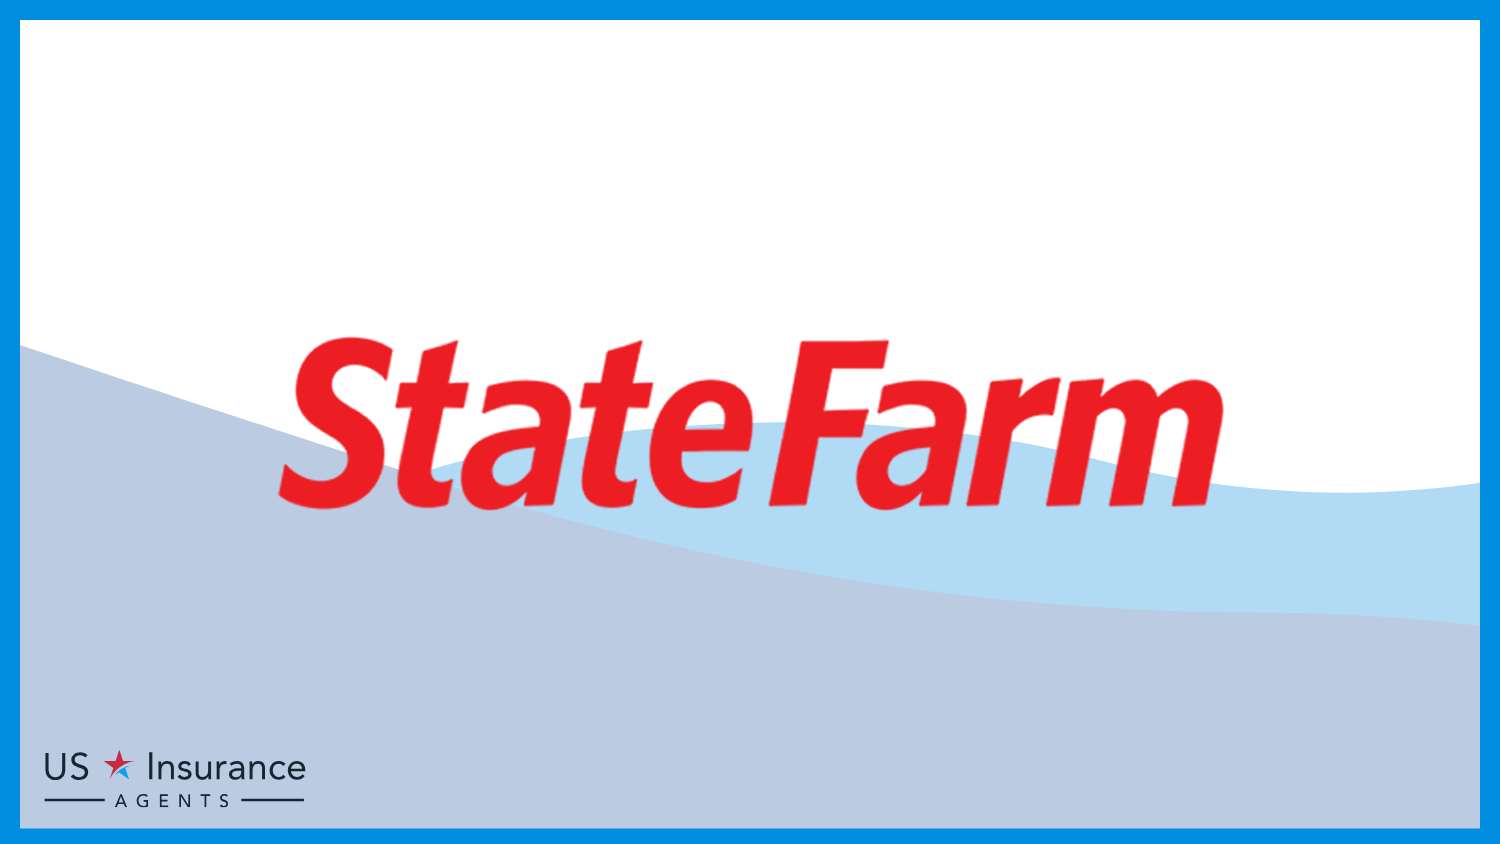 State Farm: Best Business Insurance for Car Rental Services